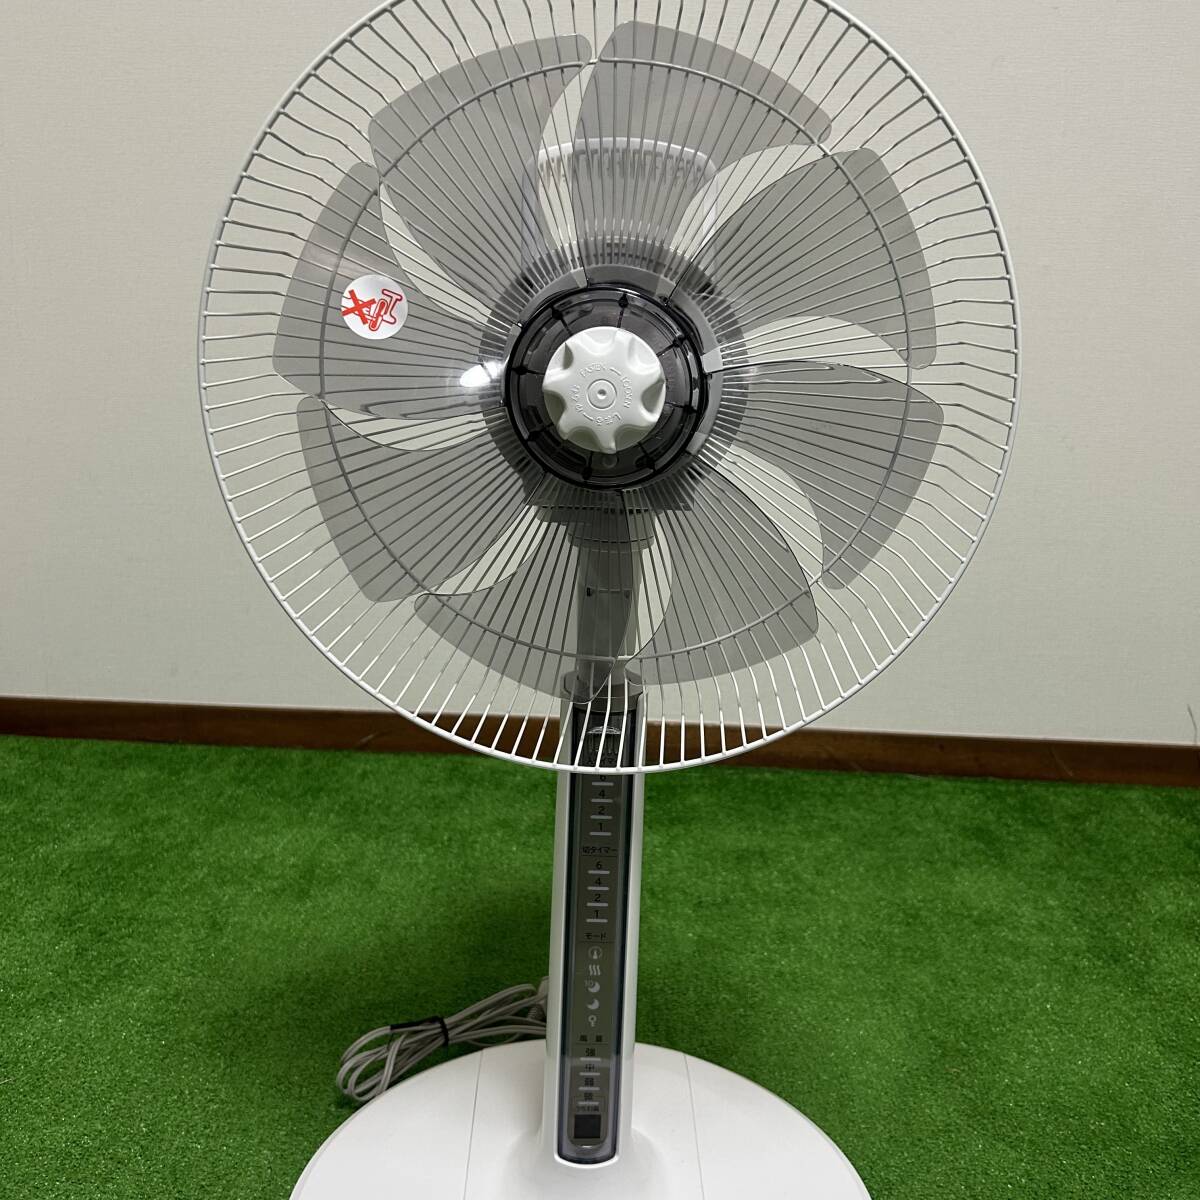 [ operation goods ] Hitachi electric fan HEF-AL300AE7N beautiful goods remote control attaching site goods summer one person living comfortable 